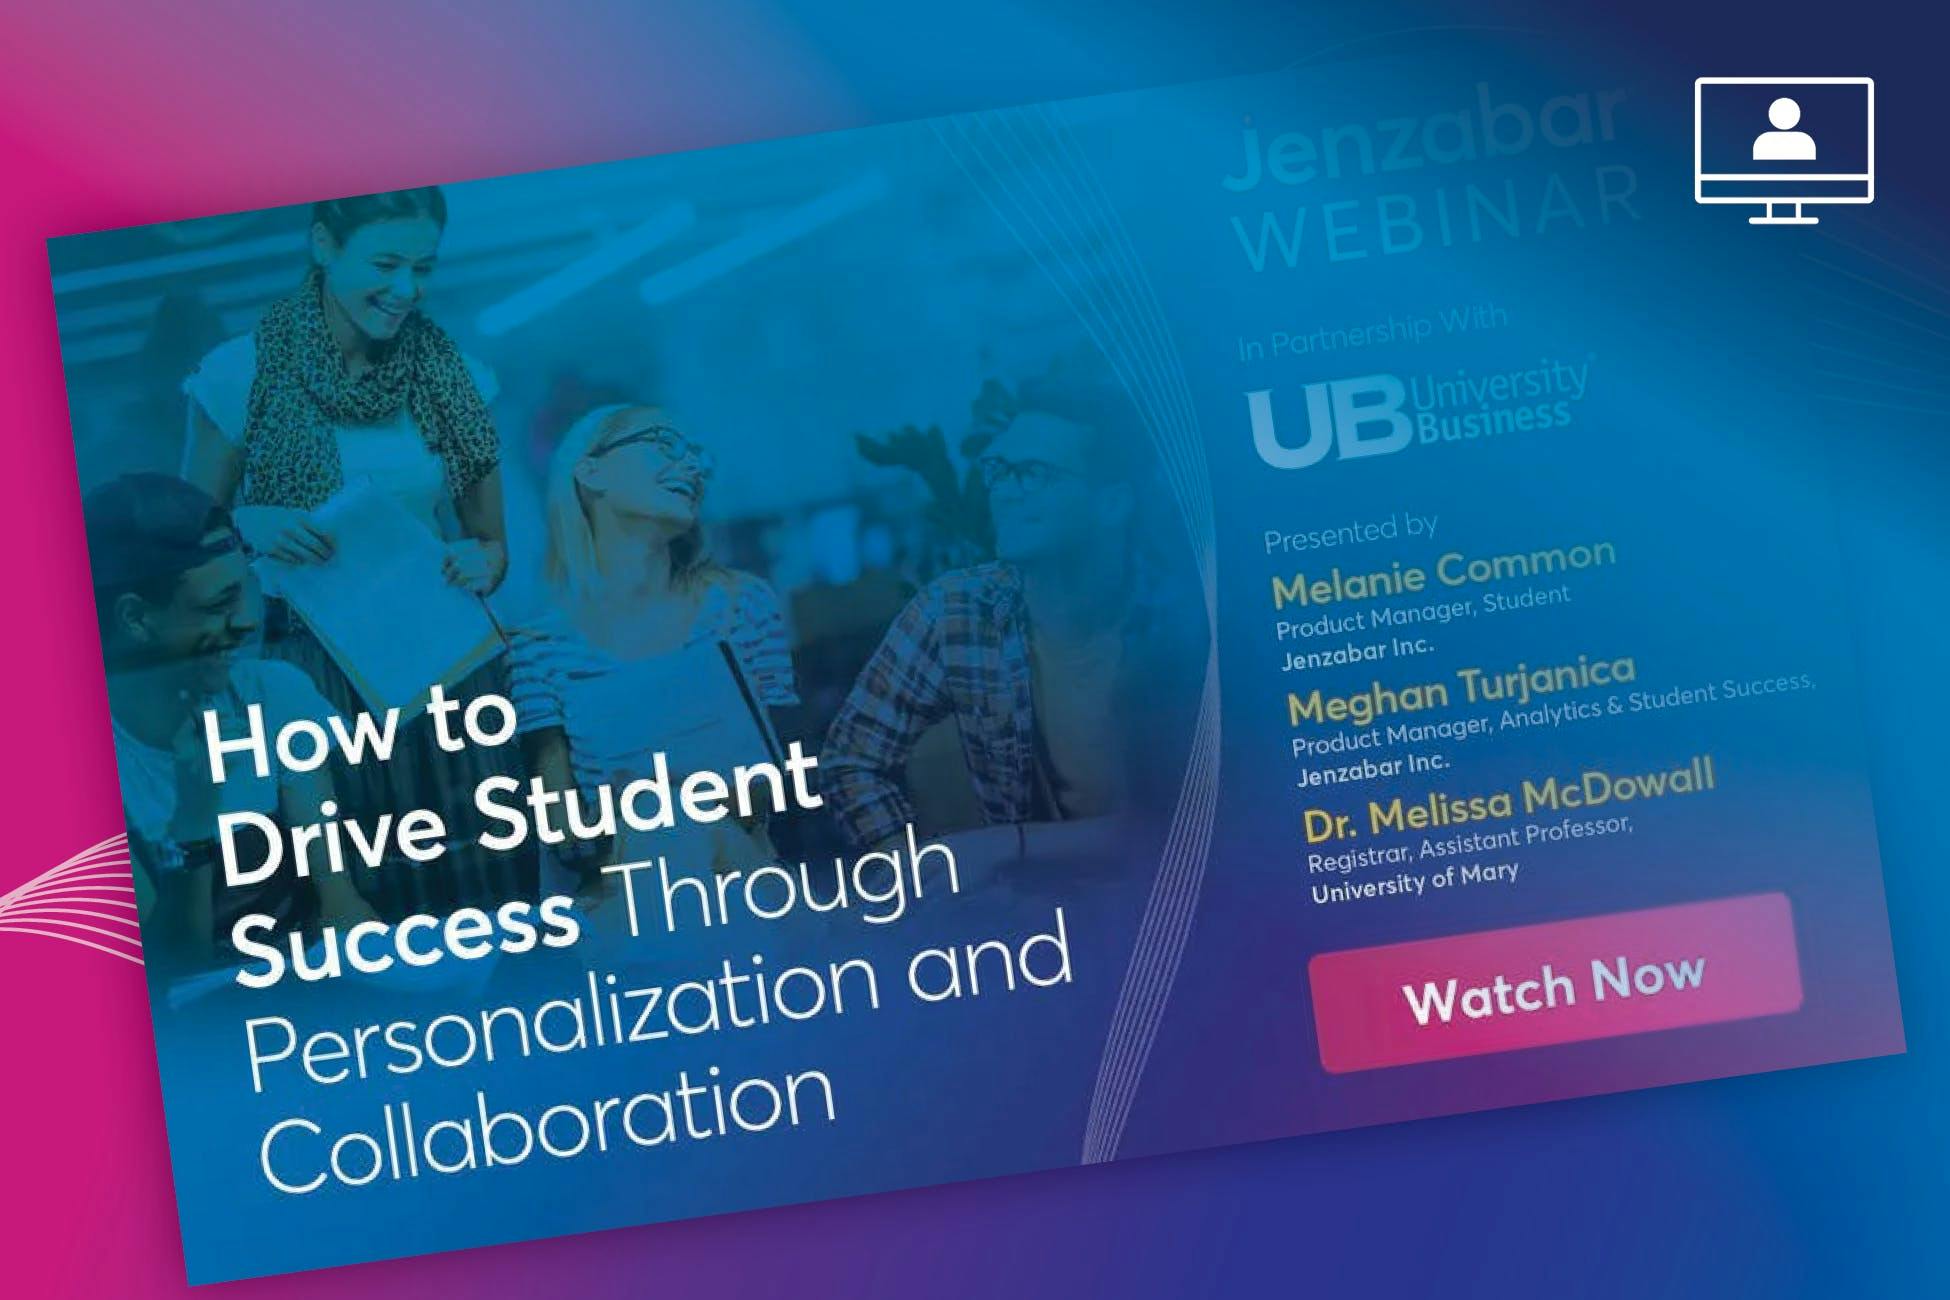 Webinar: How to Drive Student Success Through Personalization and Collaboration